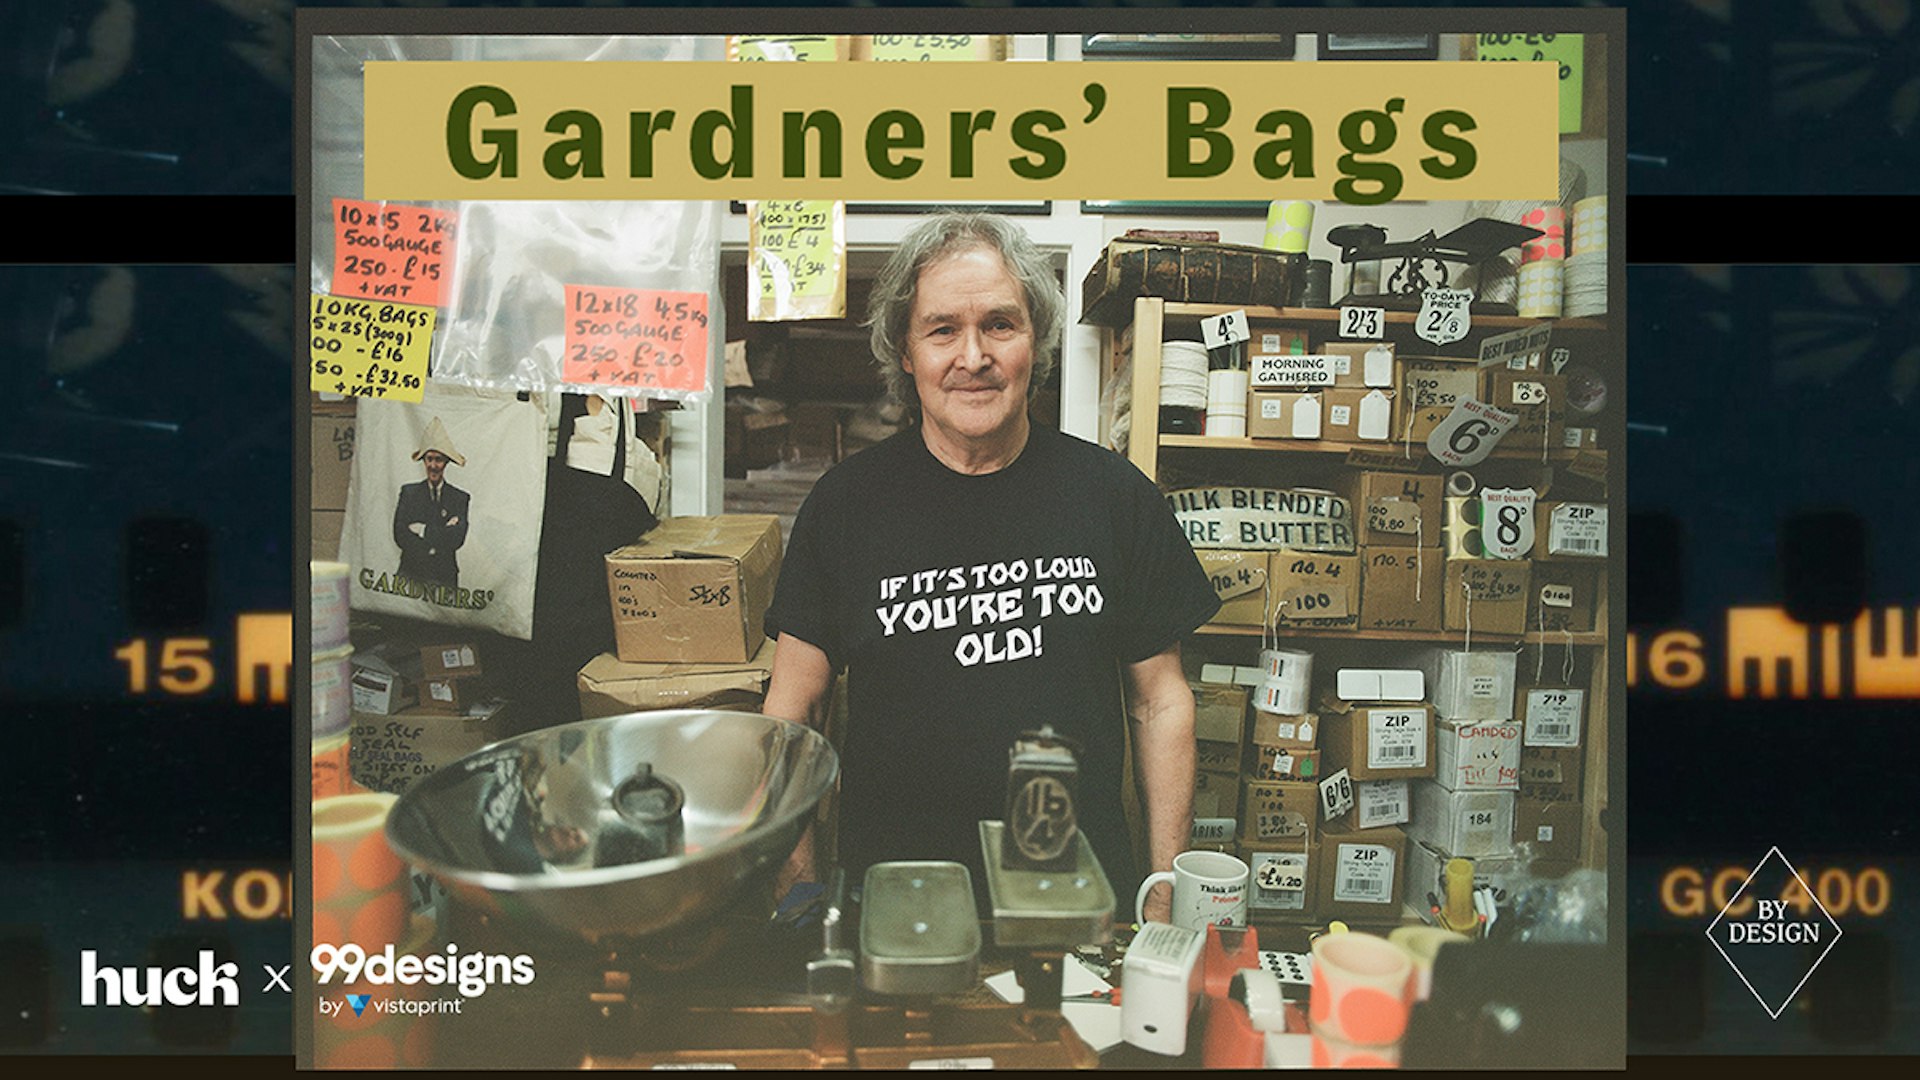 London’s paper-bag dynasty is forging a new future